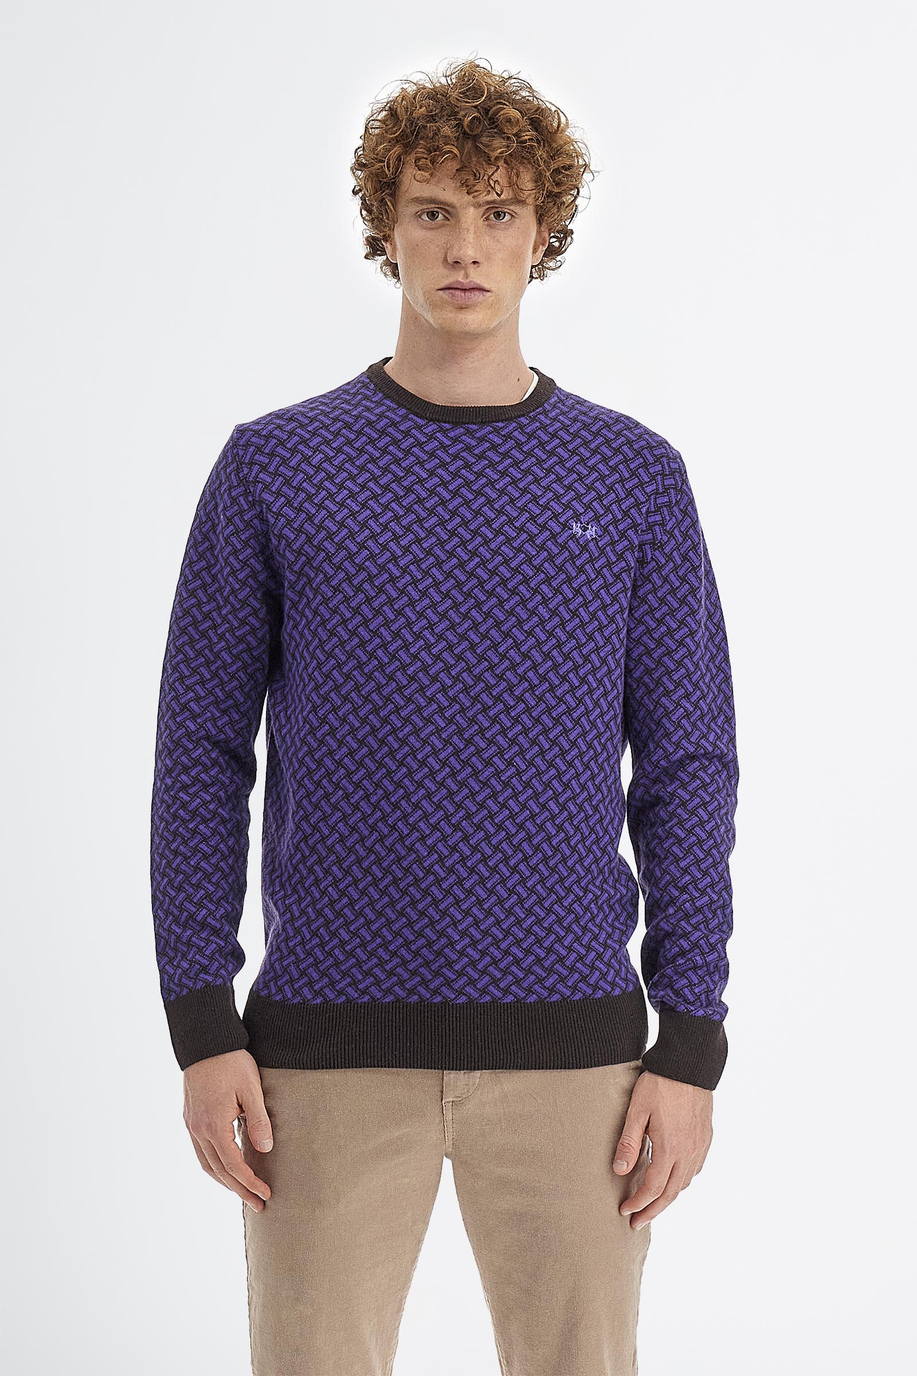 Men’s crew neck sweater Argentina with long sleeves in regular fit cashmere merino wool blend - Capsule | La Martina - Official Online Shop